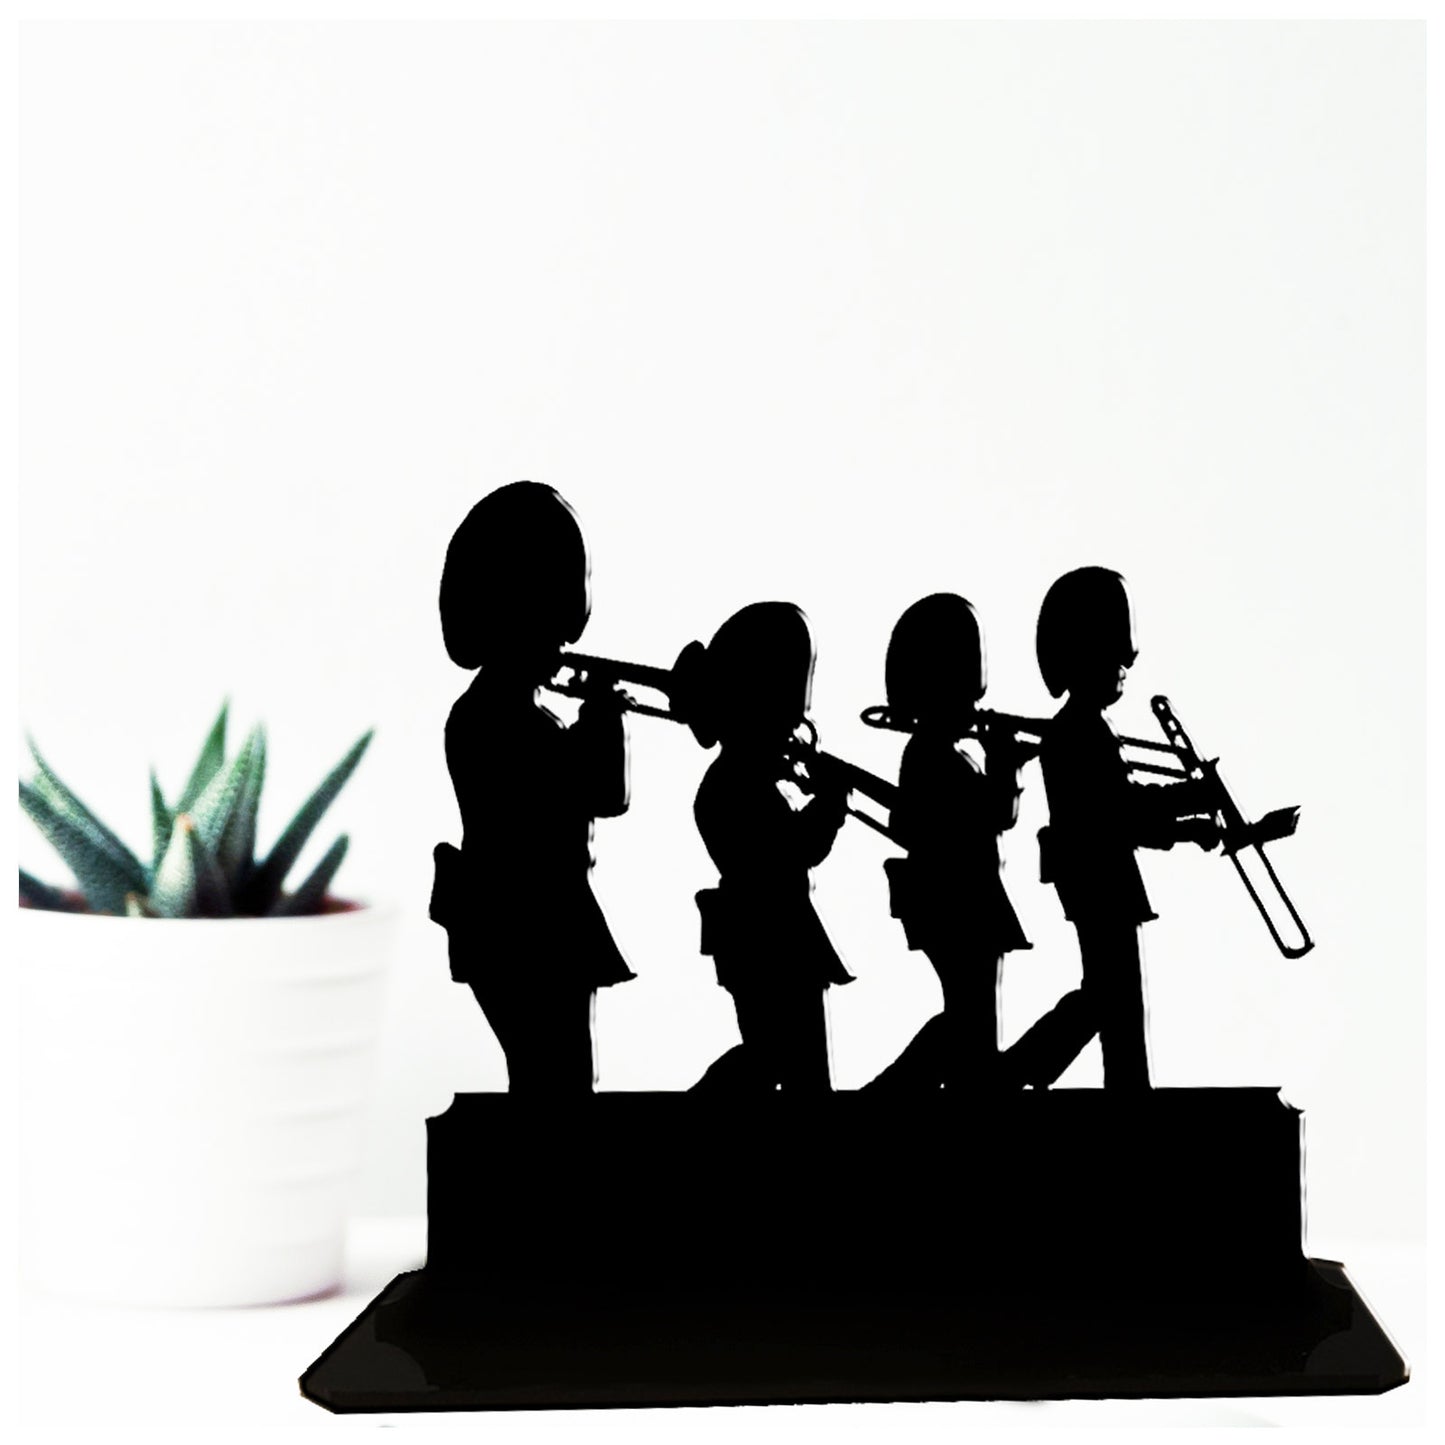 Acrylic personalised british guards army band gift ideas for army lovers. Standalone keepsake ornaments.